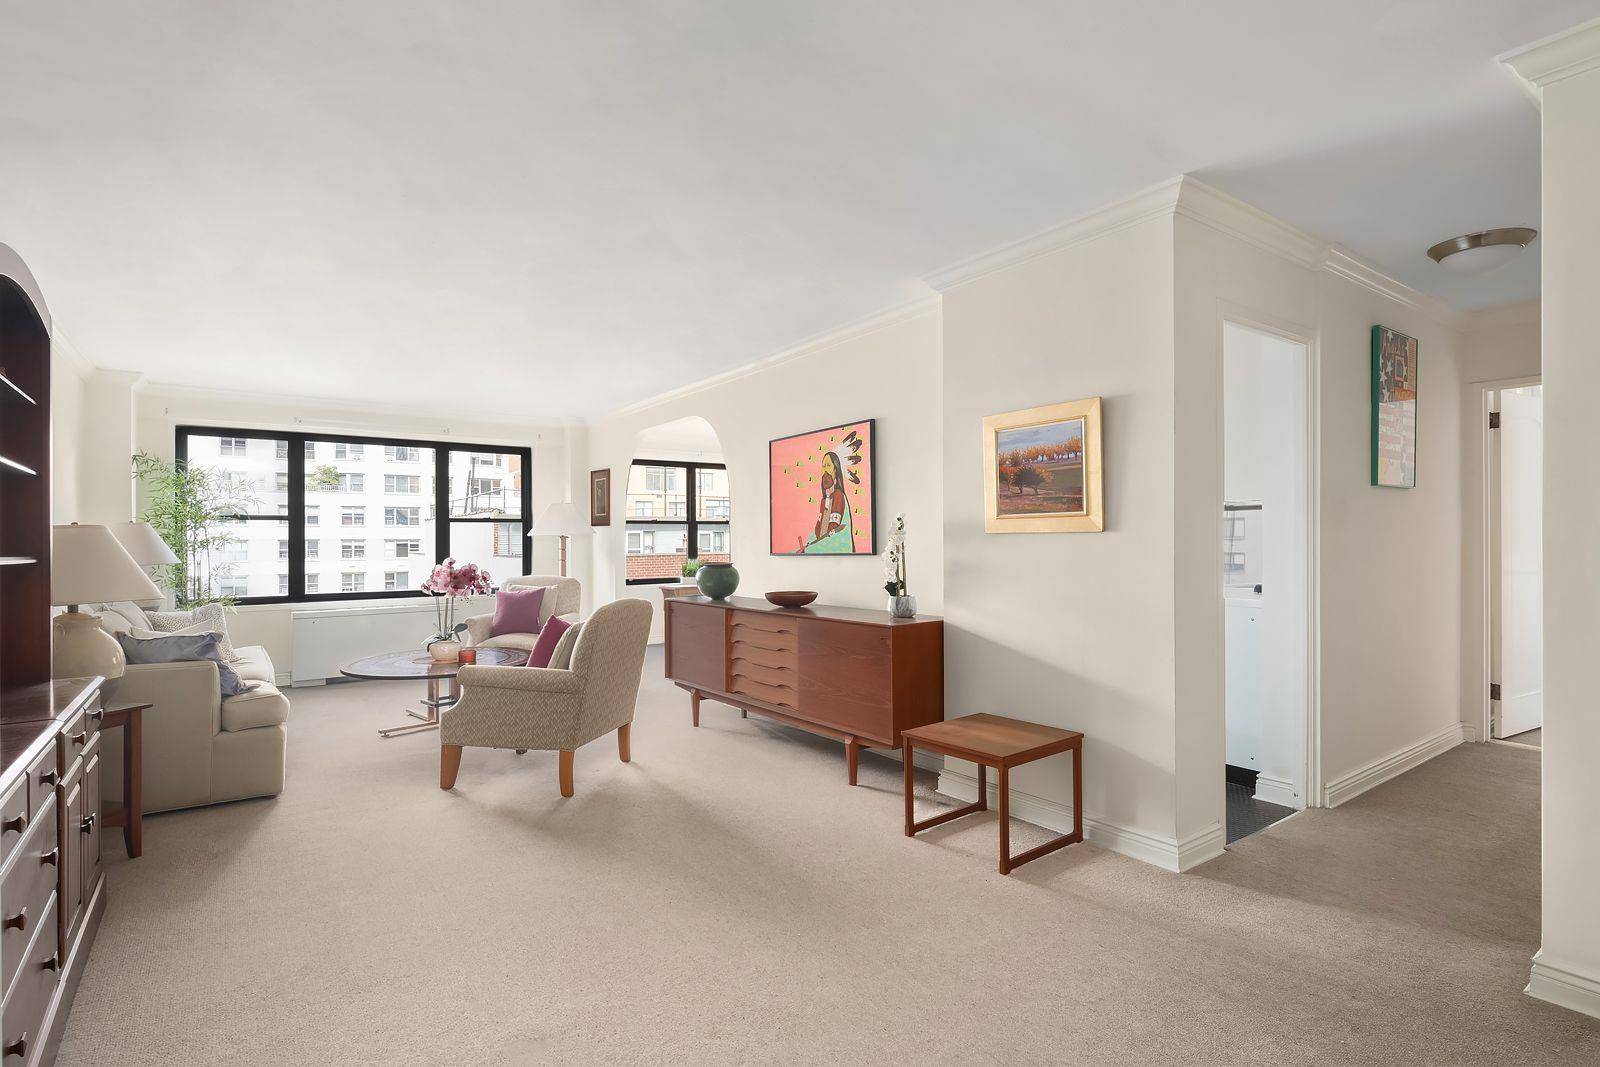 This pin drop quiet and bright oversized convertible 2 bedroom 1 bathroom corner home resides inThe East River House, a luxury full service cooperative located in the heart ofthe sought ...